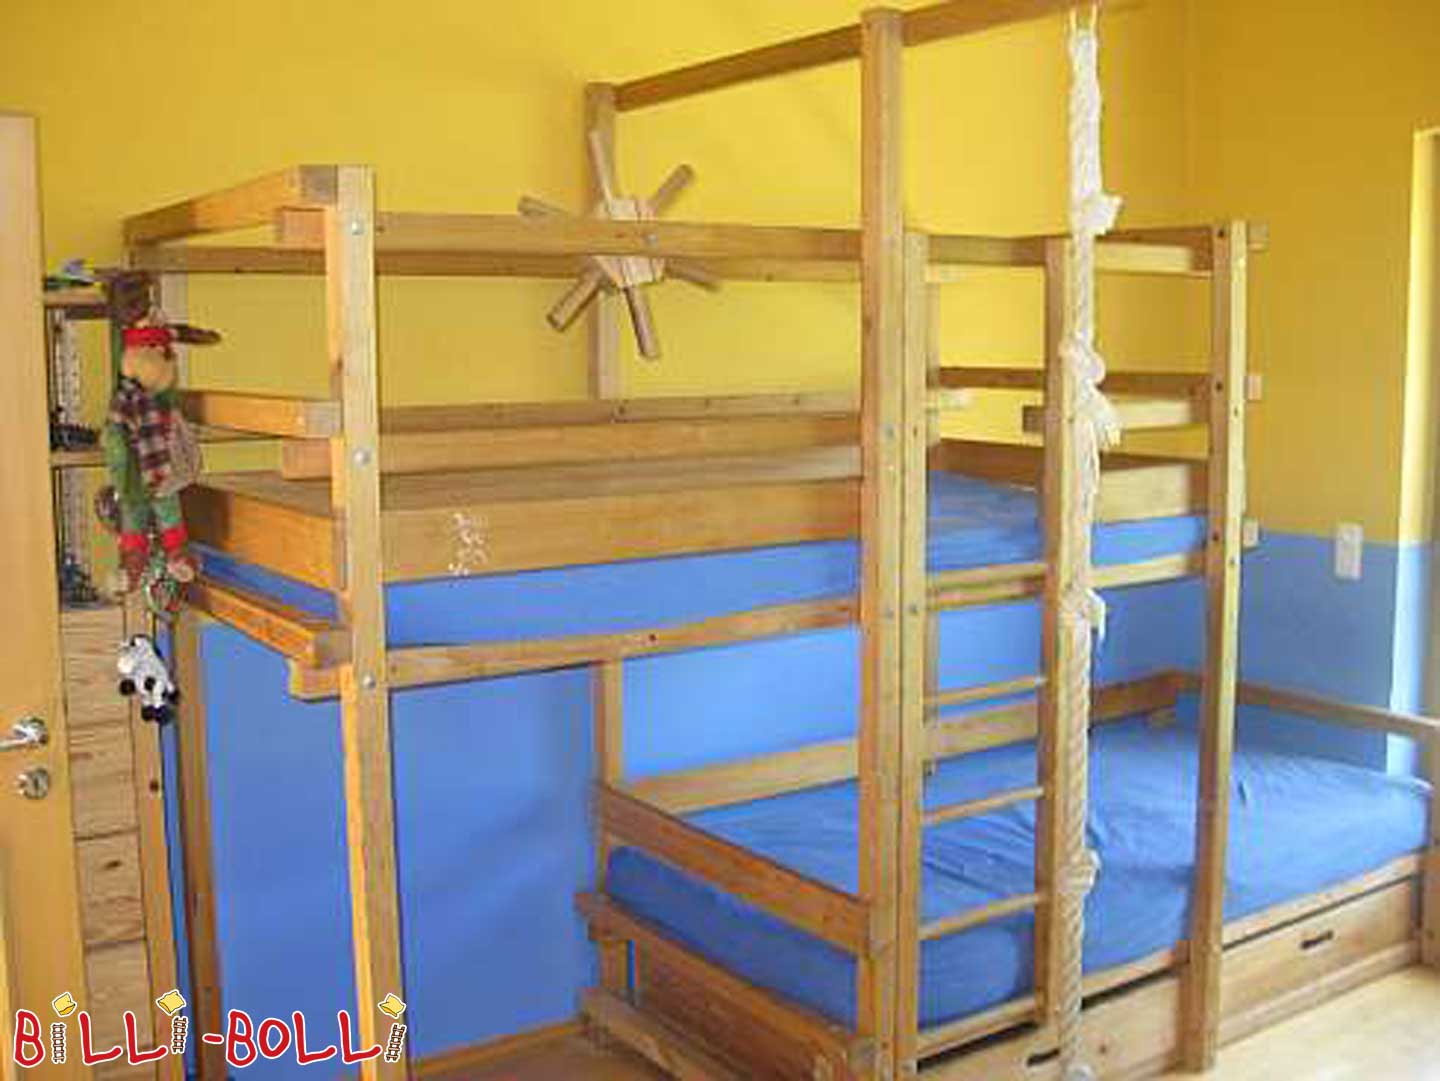 Gullibo Pirate Bunk Bed (Category: second hand bunk bed)